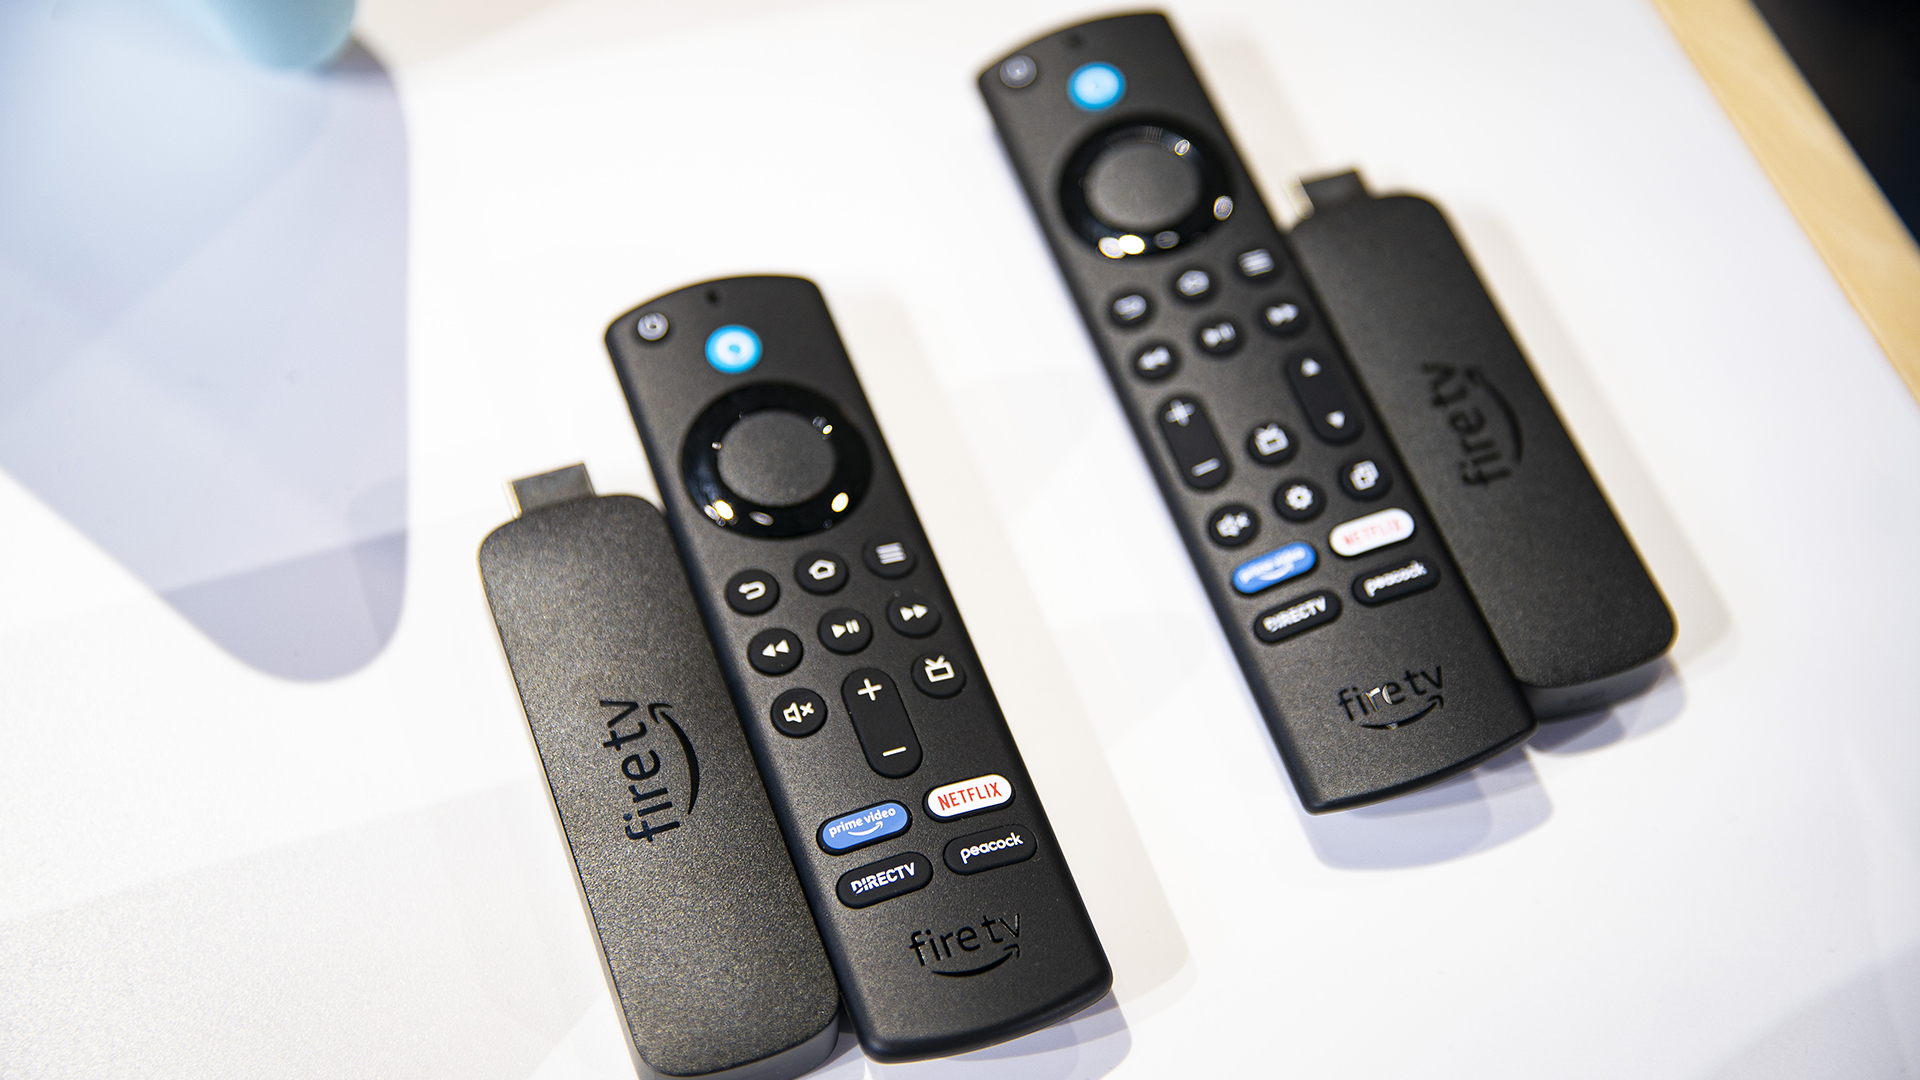 “Unbelievable App Discovery: Amazon Fire TV Stick unlocks thousands of free movies and 400 channels for lucky owners!” #AmazonFireTVStick #FreeMovies #400Channels #AppDiscovery #TVStreaming